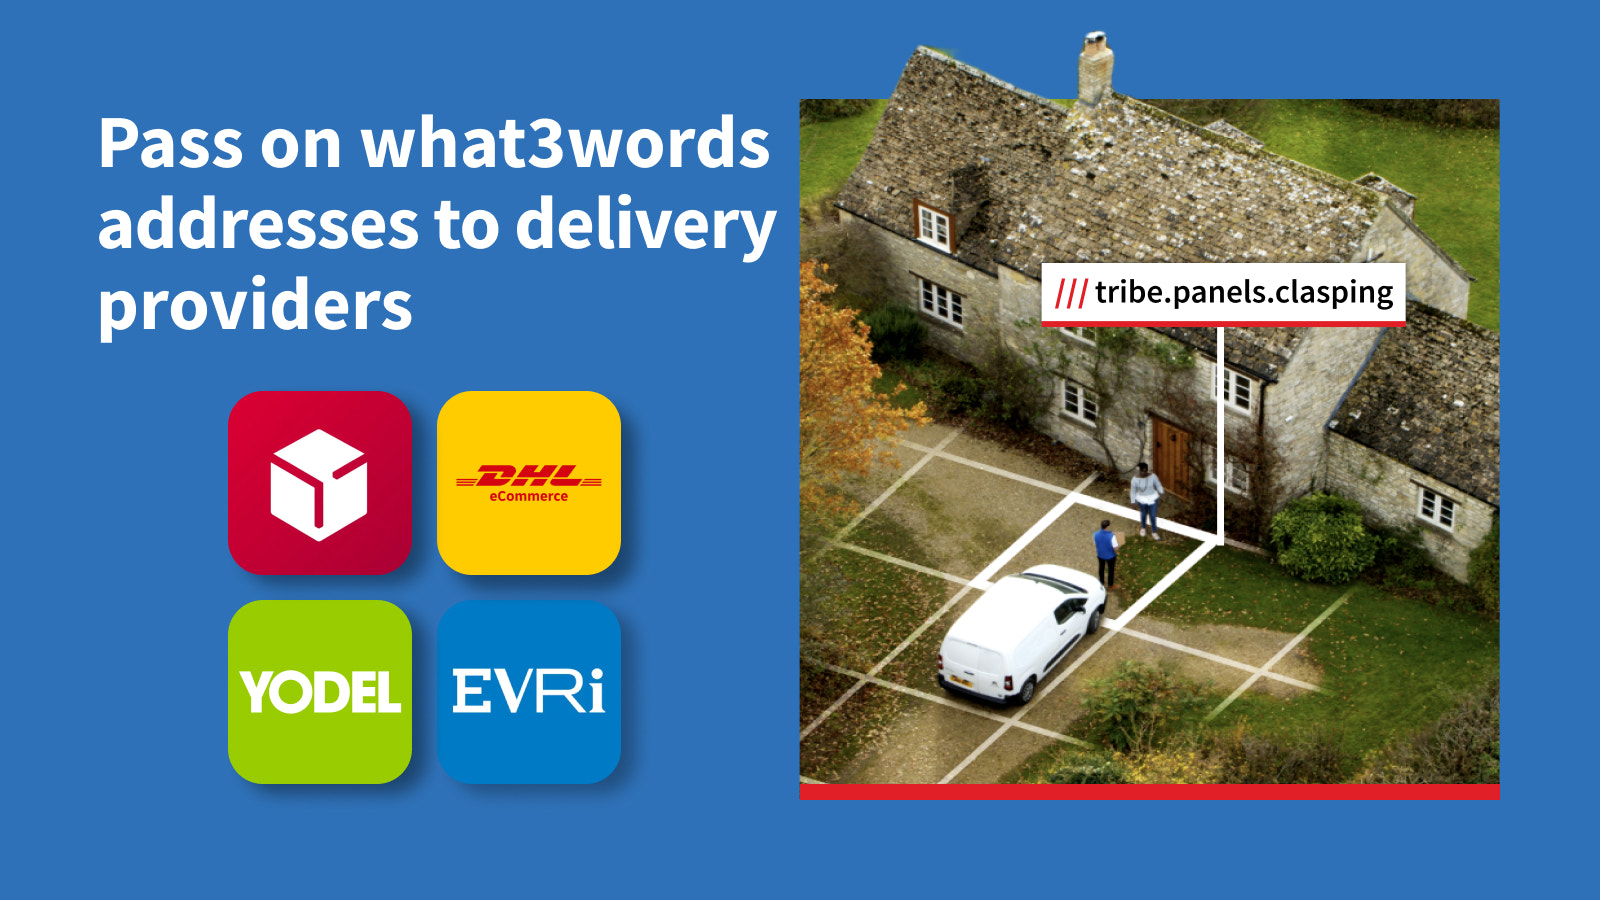 DHL, DPD and Evri logos and van driving up to what3words address